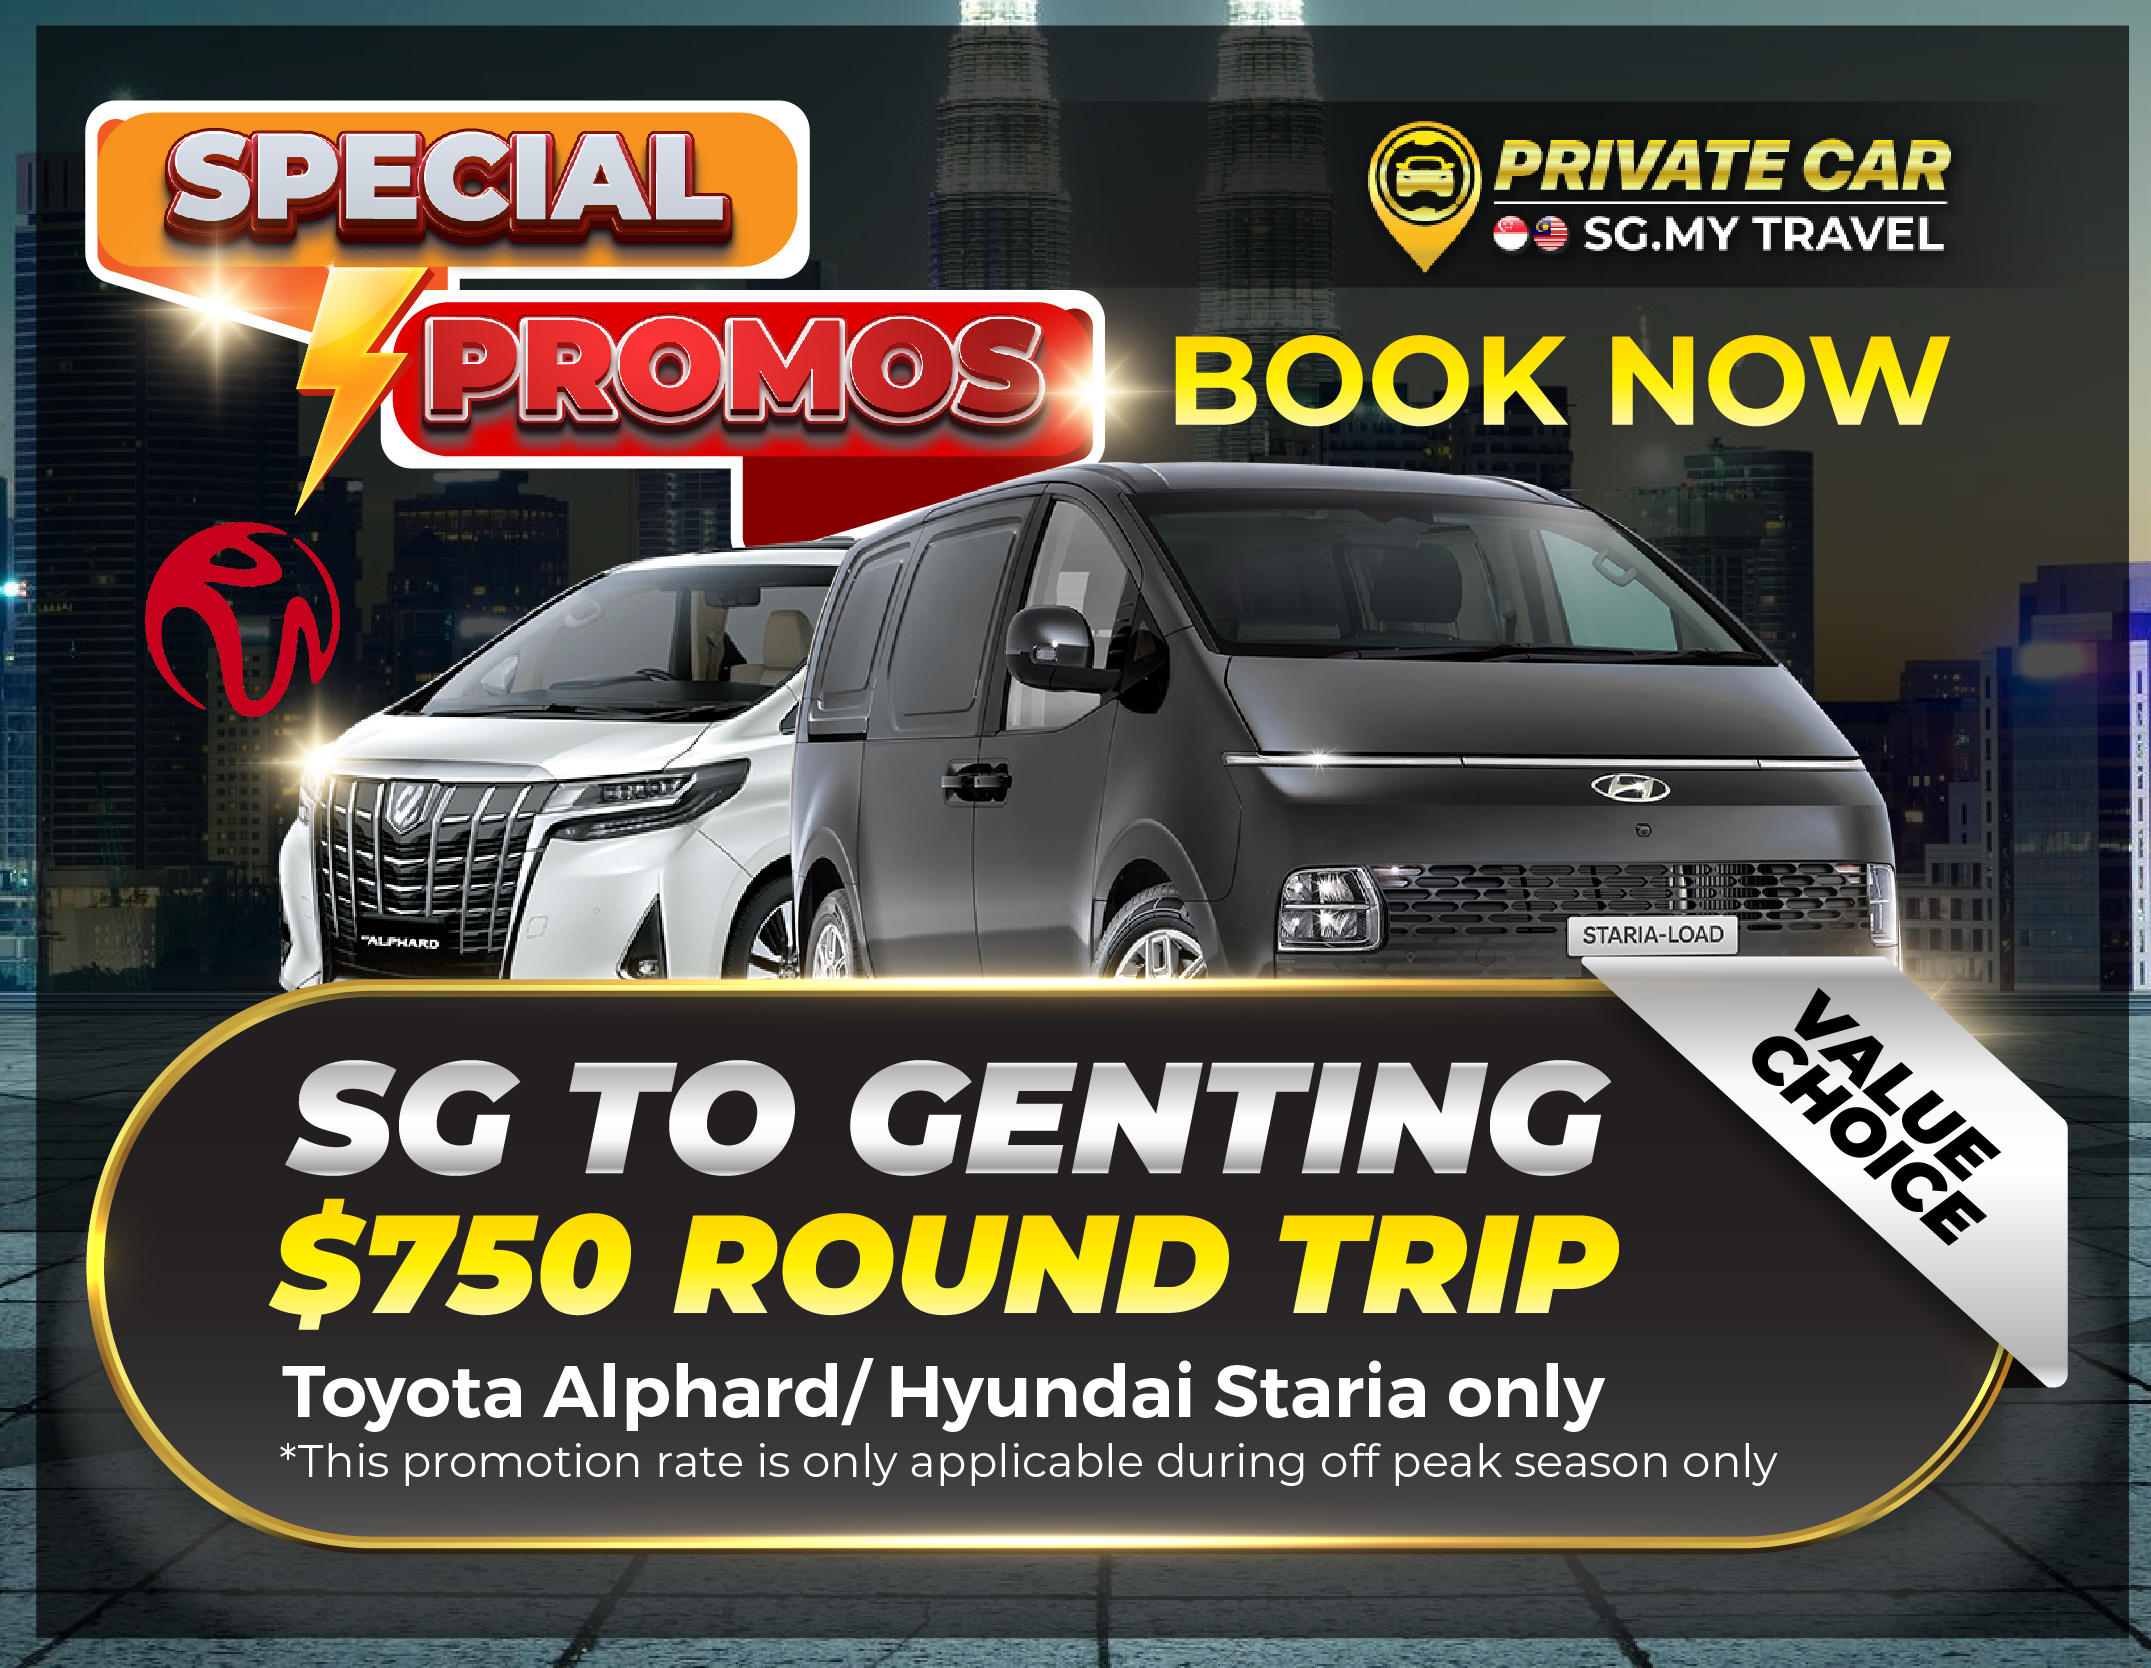 Booking Taxi from Singapore to Johor Premium Outlets